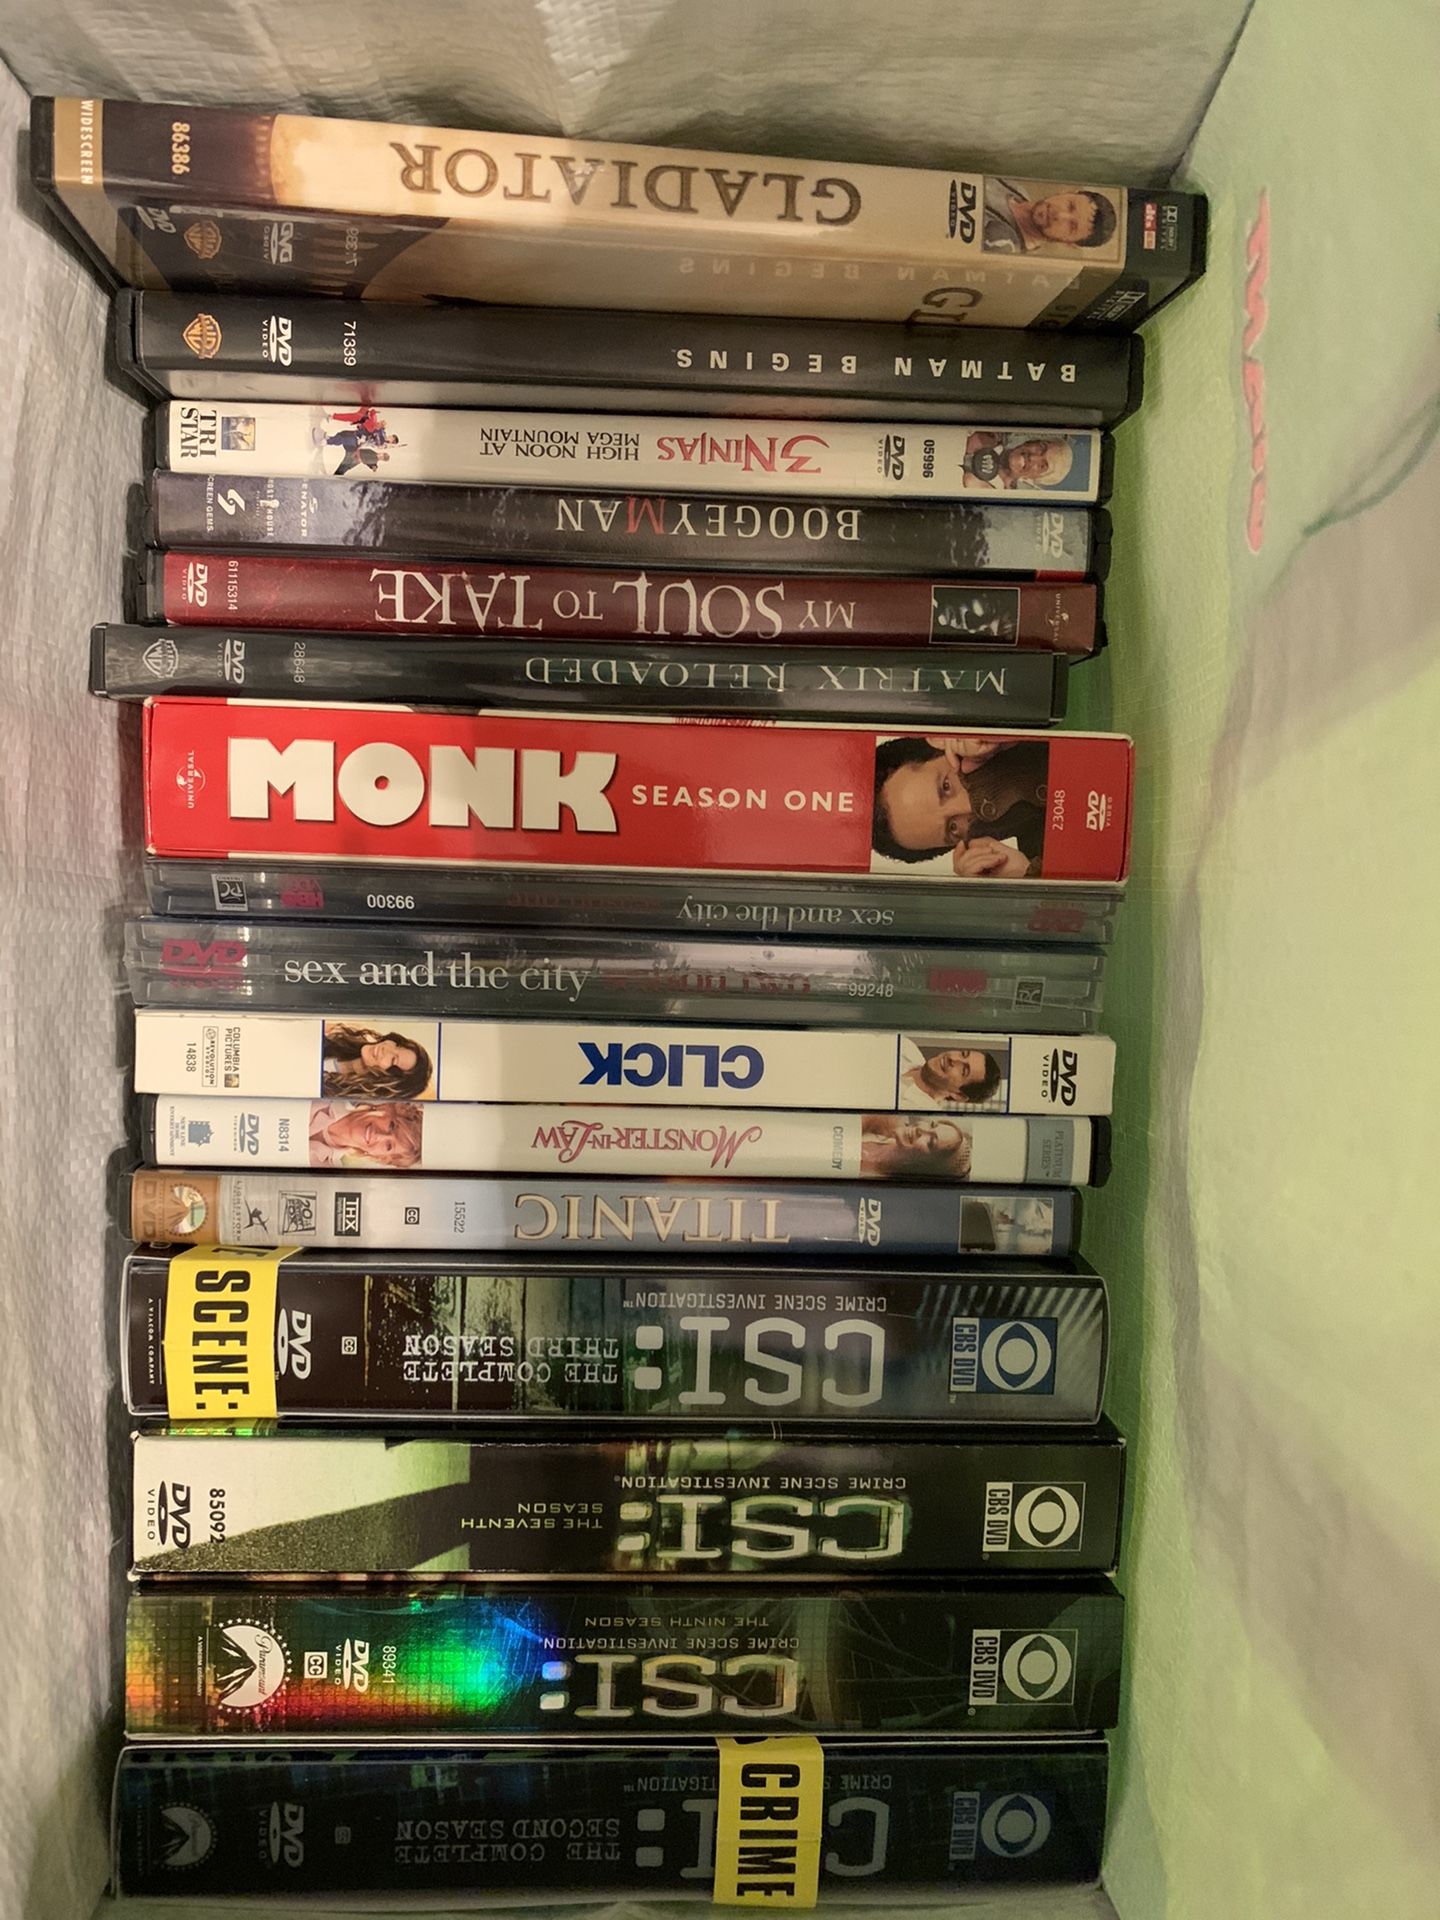 Over 30 DVDs - various titles